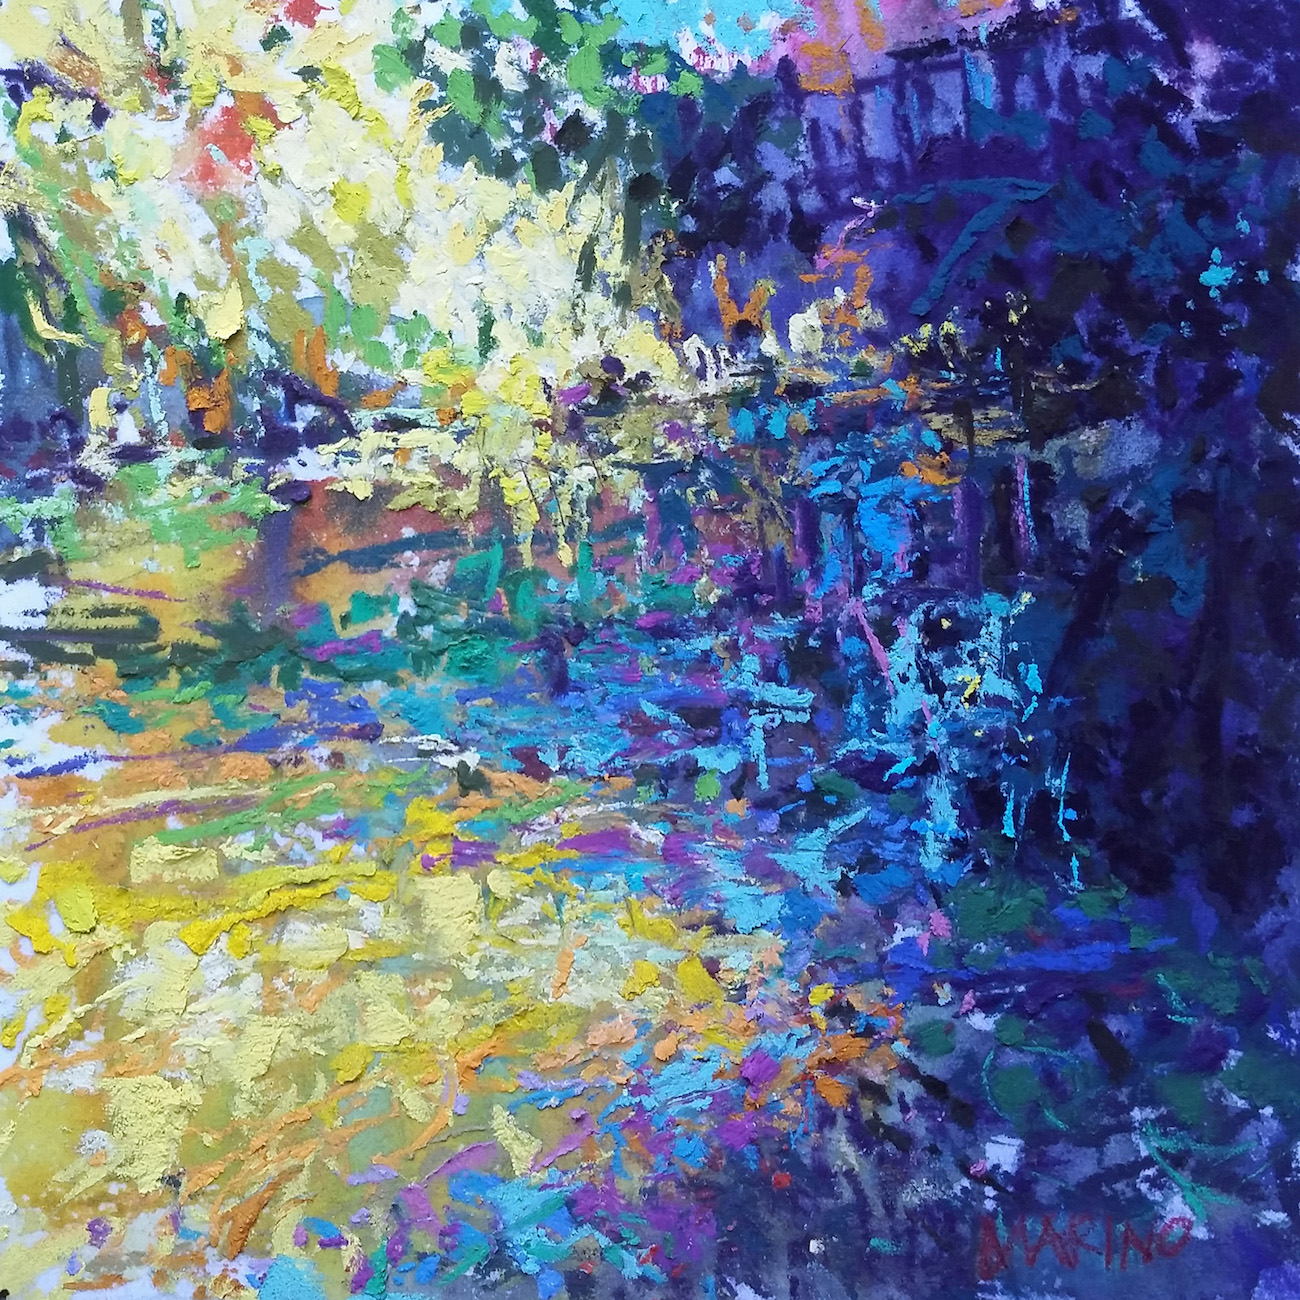 Maria Marino, "Summer Light Reflections," pastel on Multimedia Board, 6 x 6 in. Sold. Painted from a photo of a view of William Paca House Gardens, Annapolis, MD. (abstract microcosm)